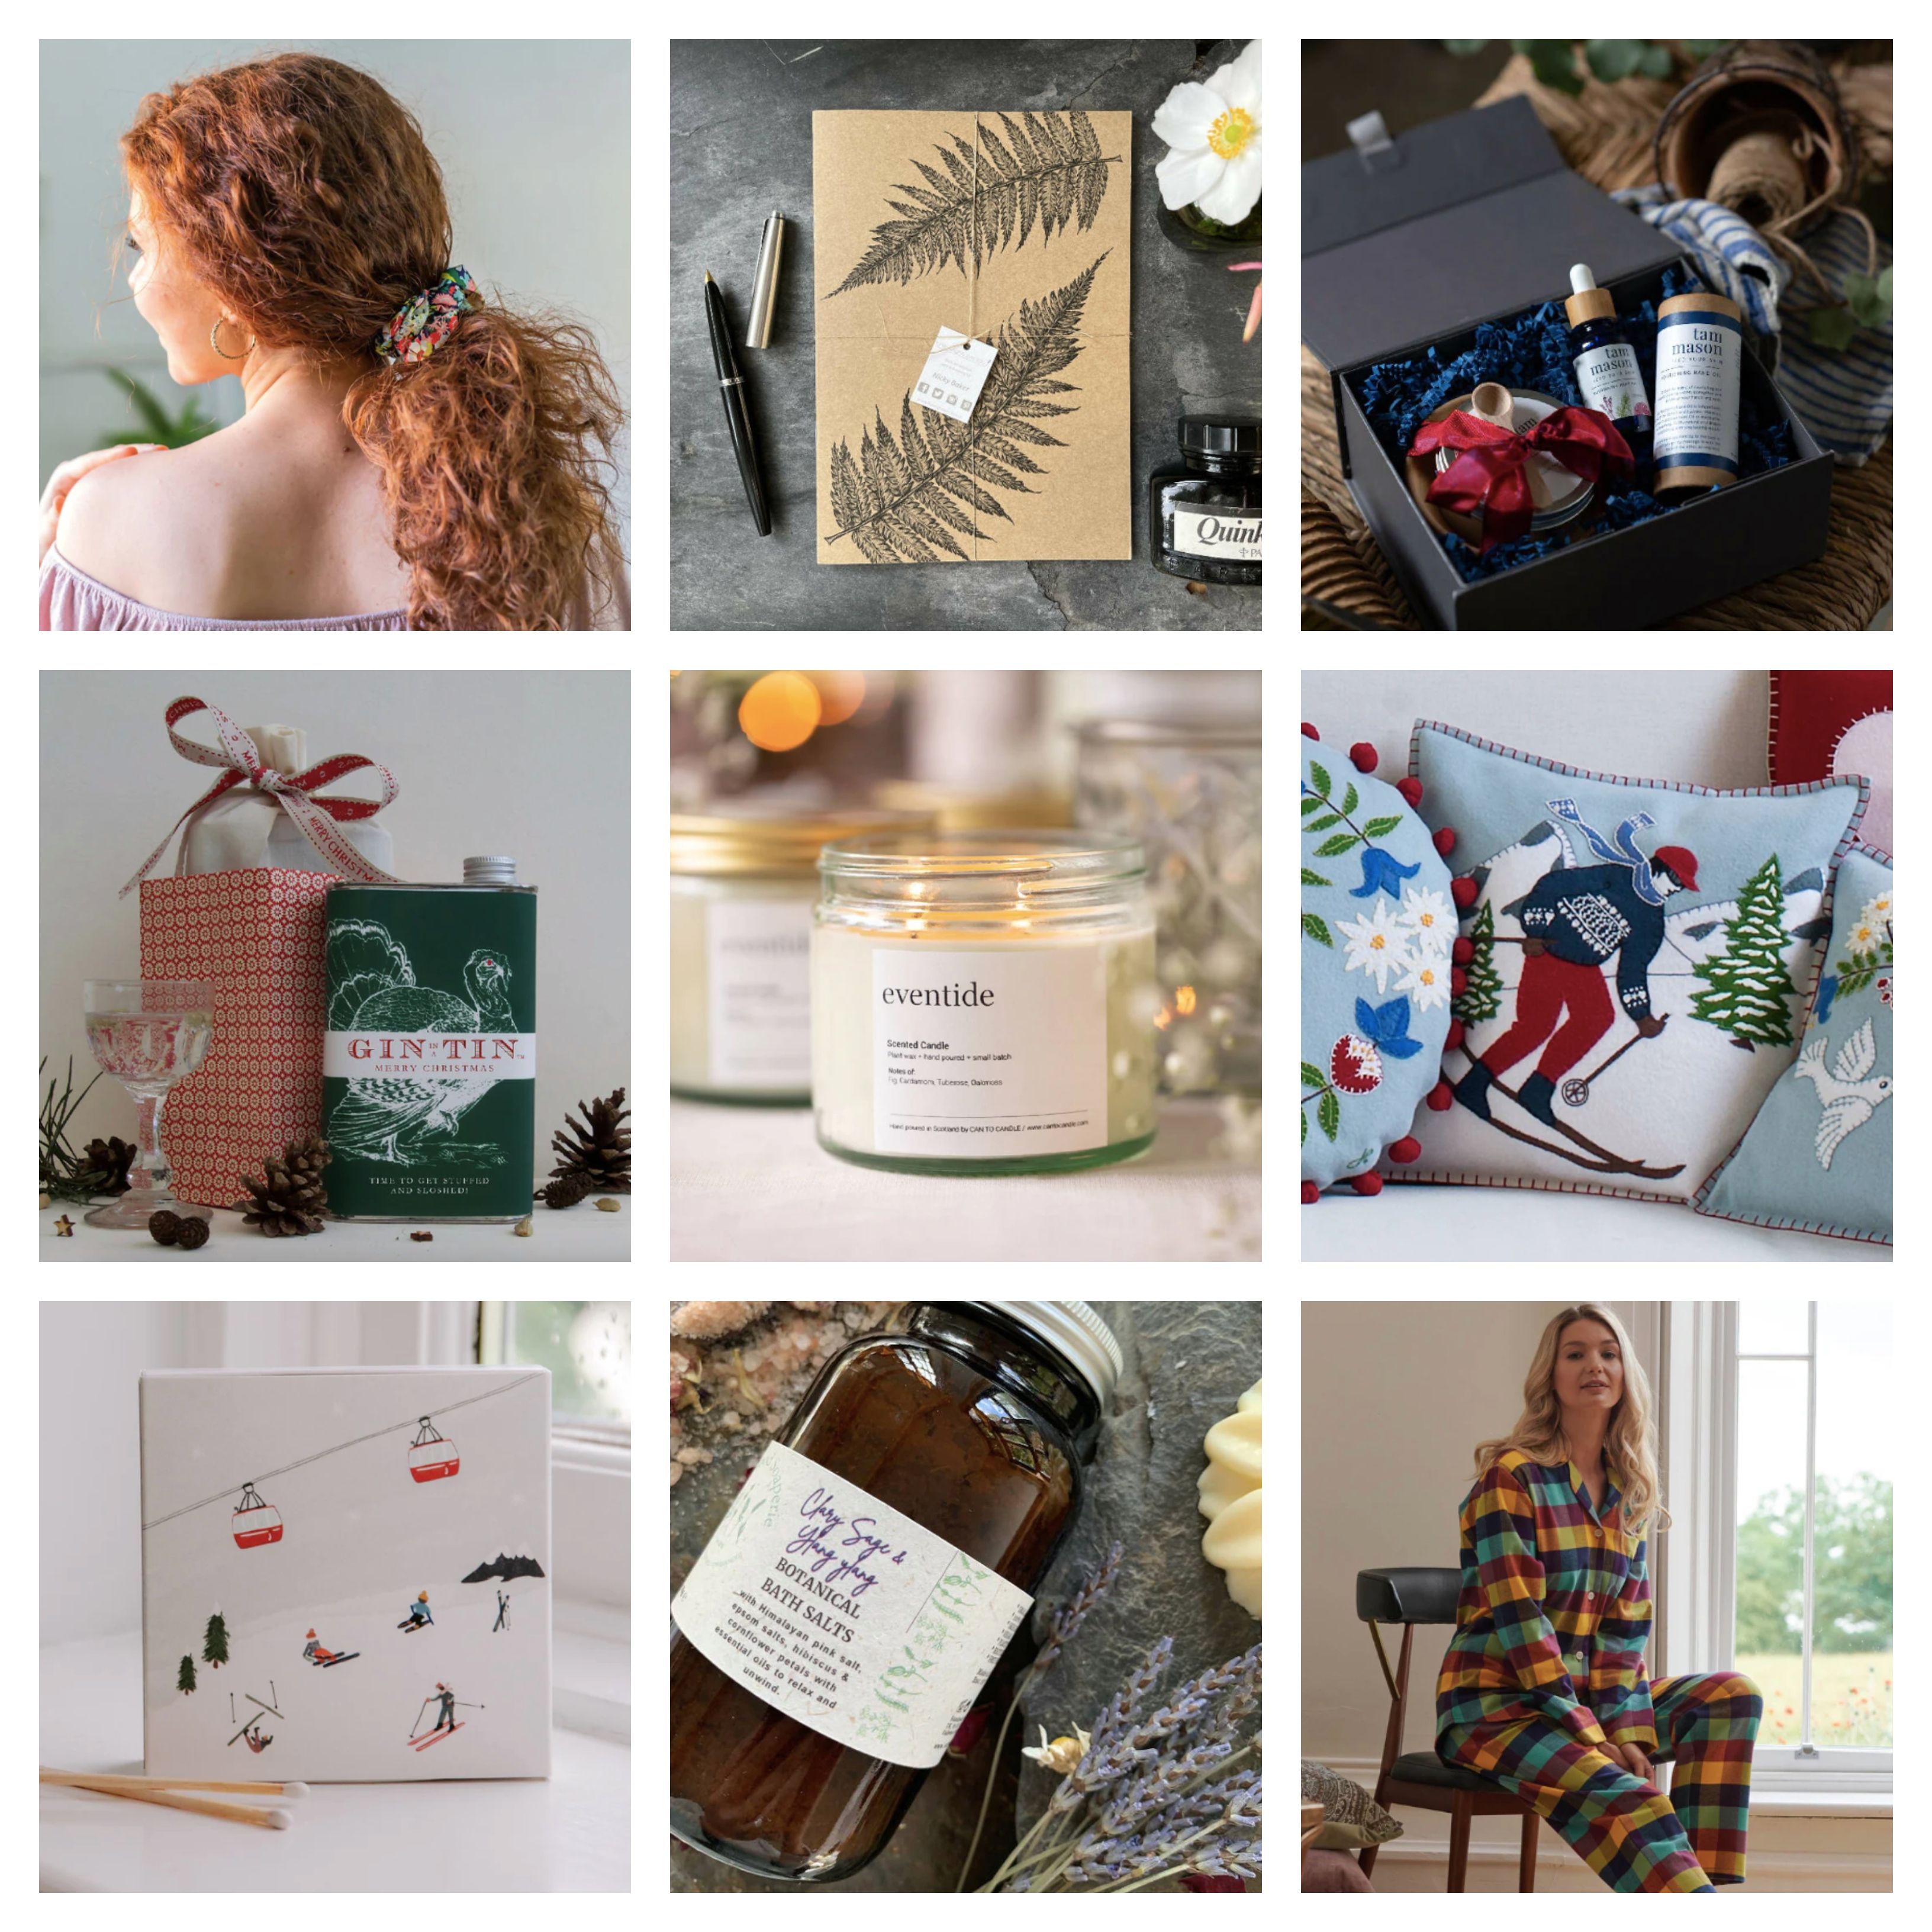 20 Thoughtful Christmas Gifts From Small Businesses And Artisans